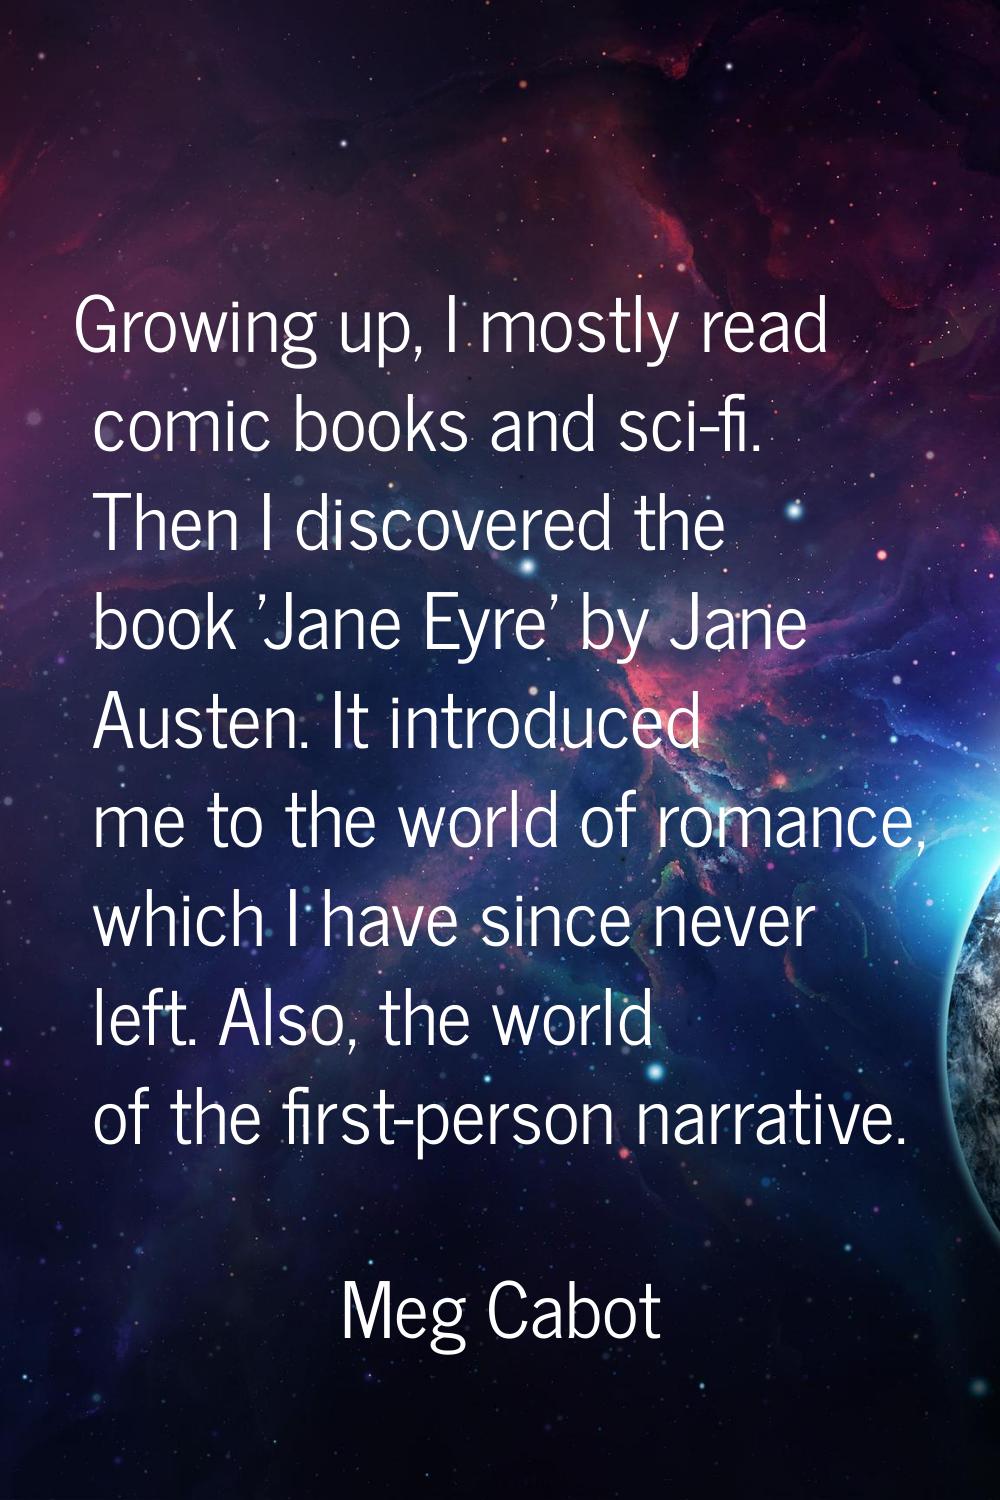 Growing up, I mostly read comic books and sci-fi. Then I discovered the book 'Jane Eyre' by Jane Au